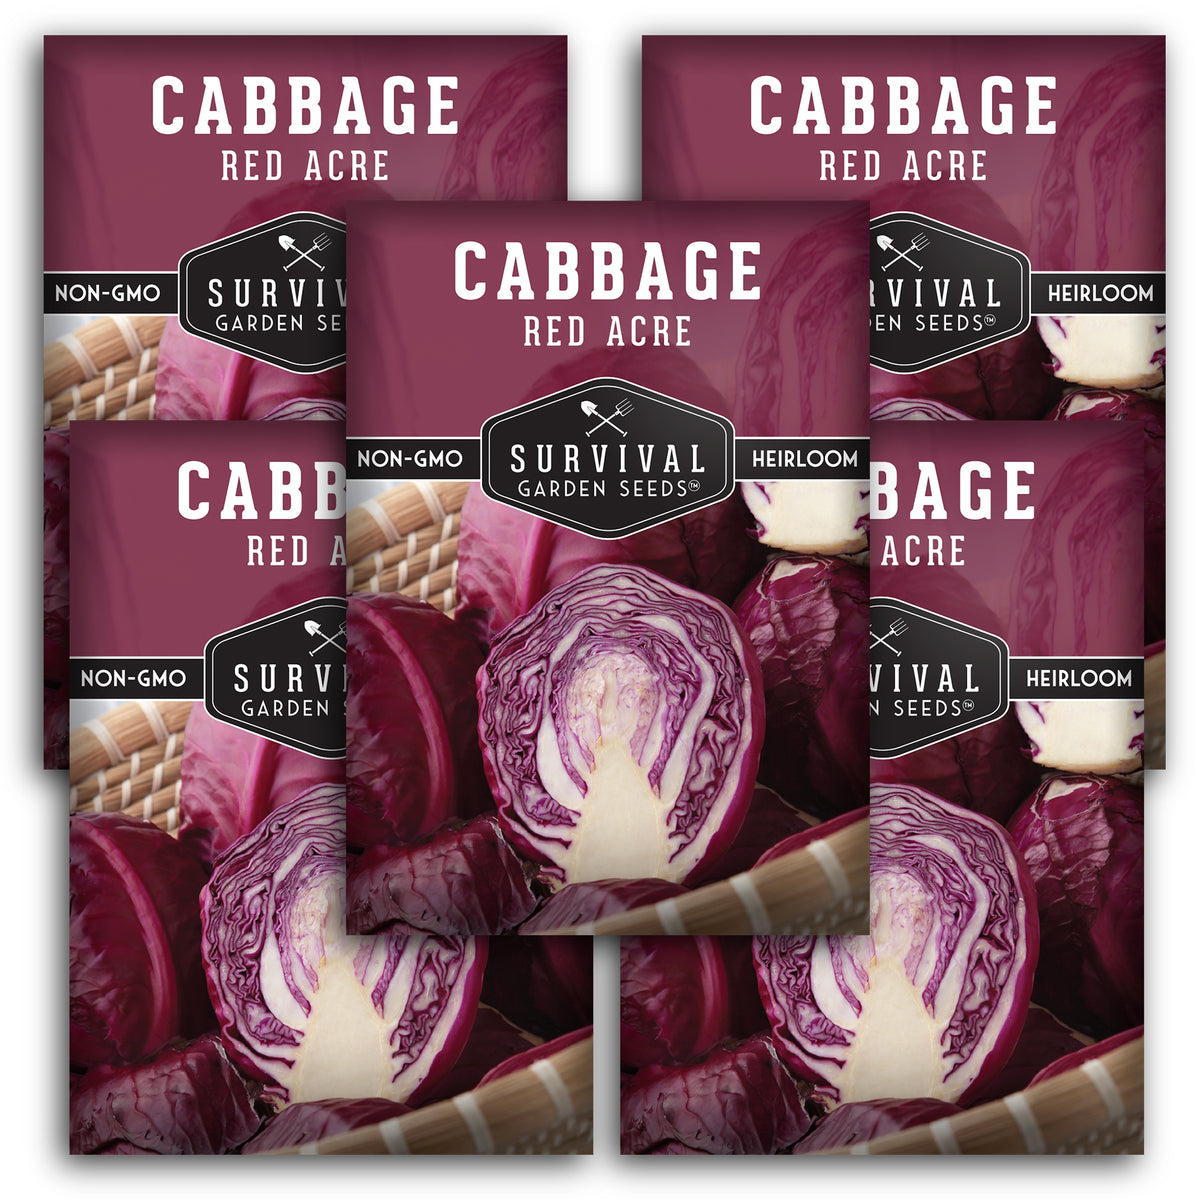 5 packets of Red Acre Cabbage Seeds